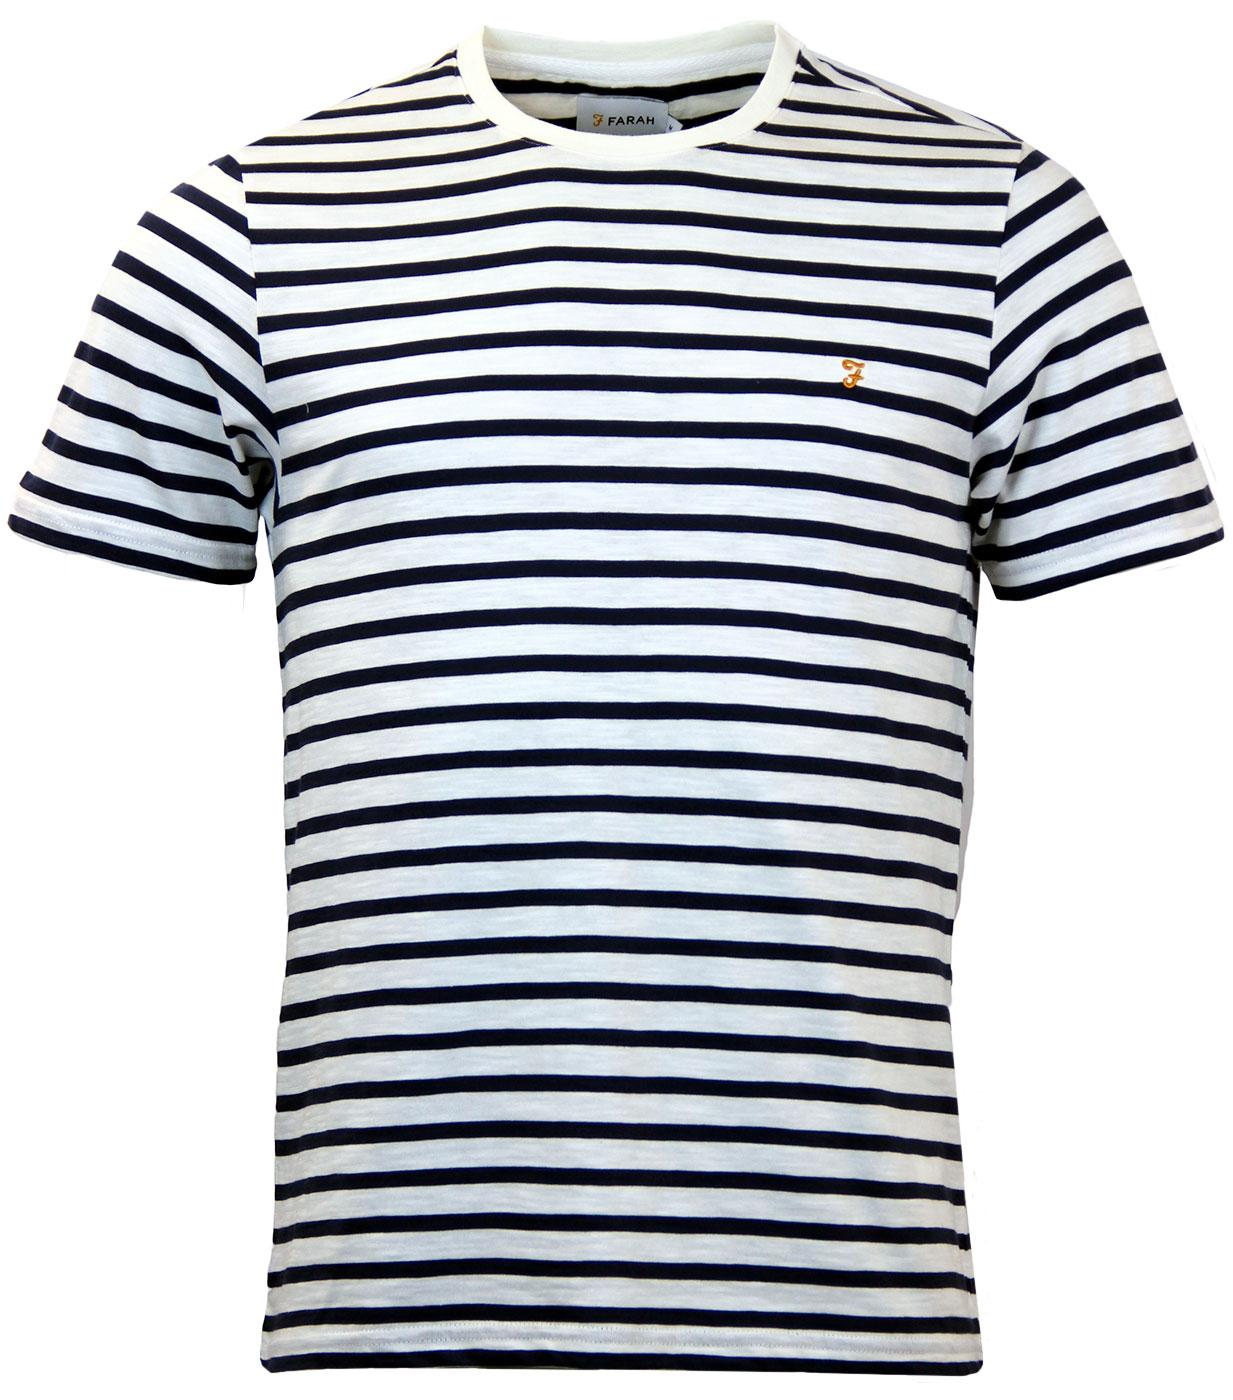 FARAH Gieger Retro Mod Sixties Striped T-Shirt in Ink Blue